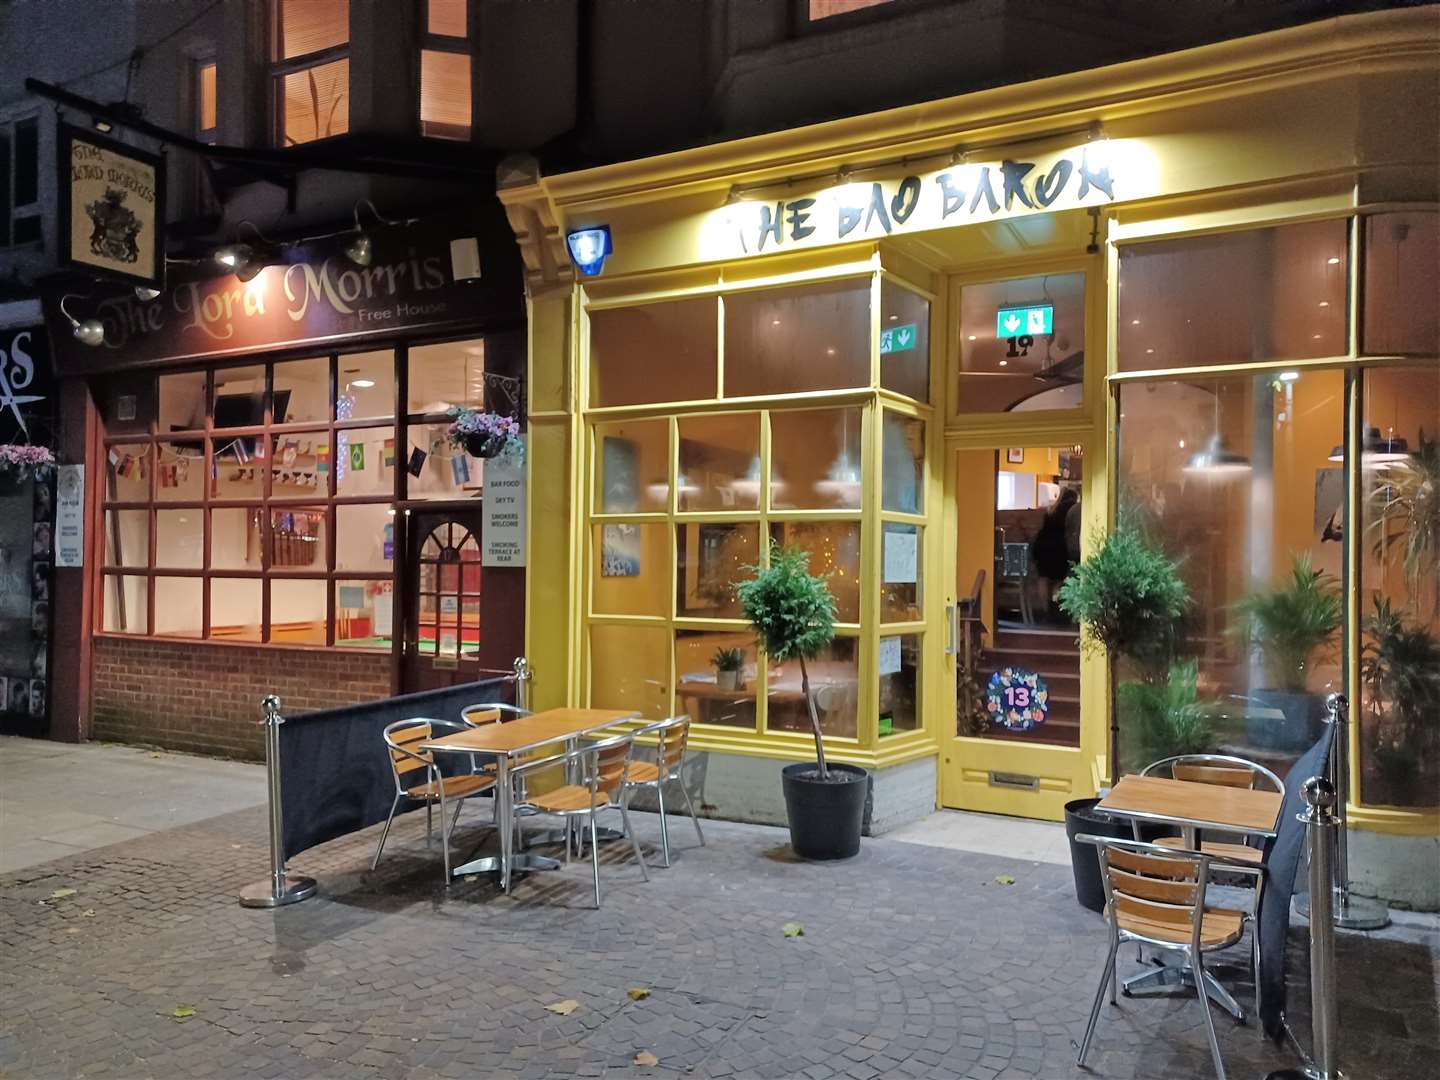 The Bao Baron in Folkestone is closing with immediate effect